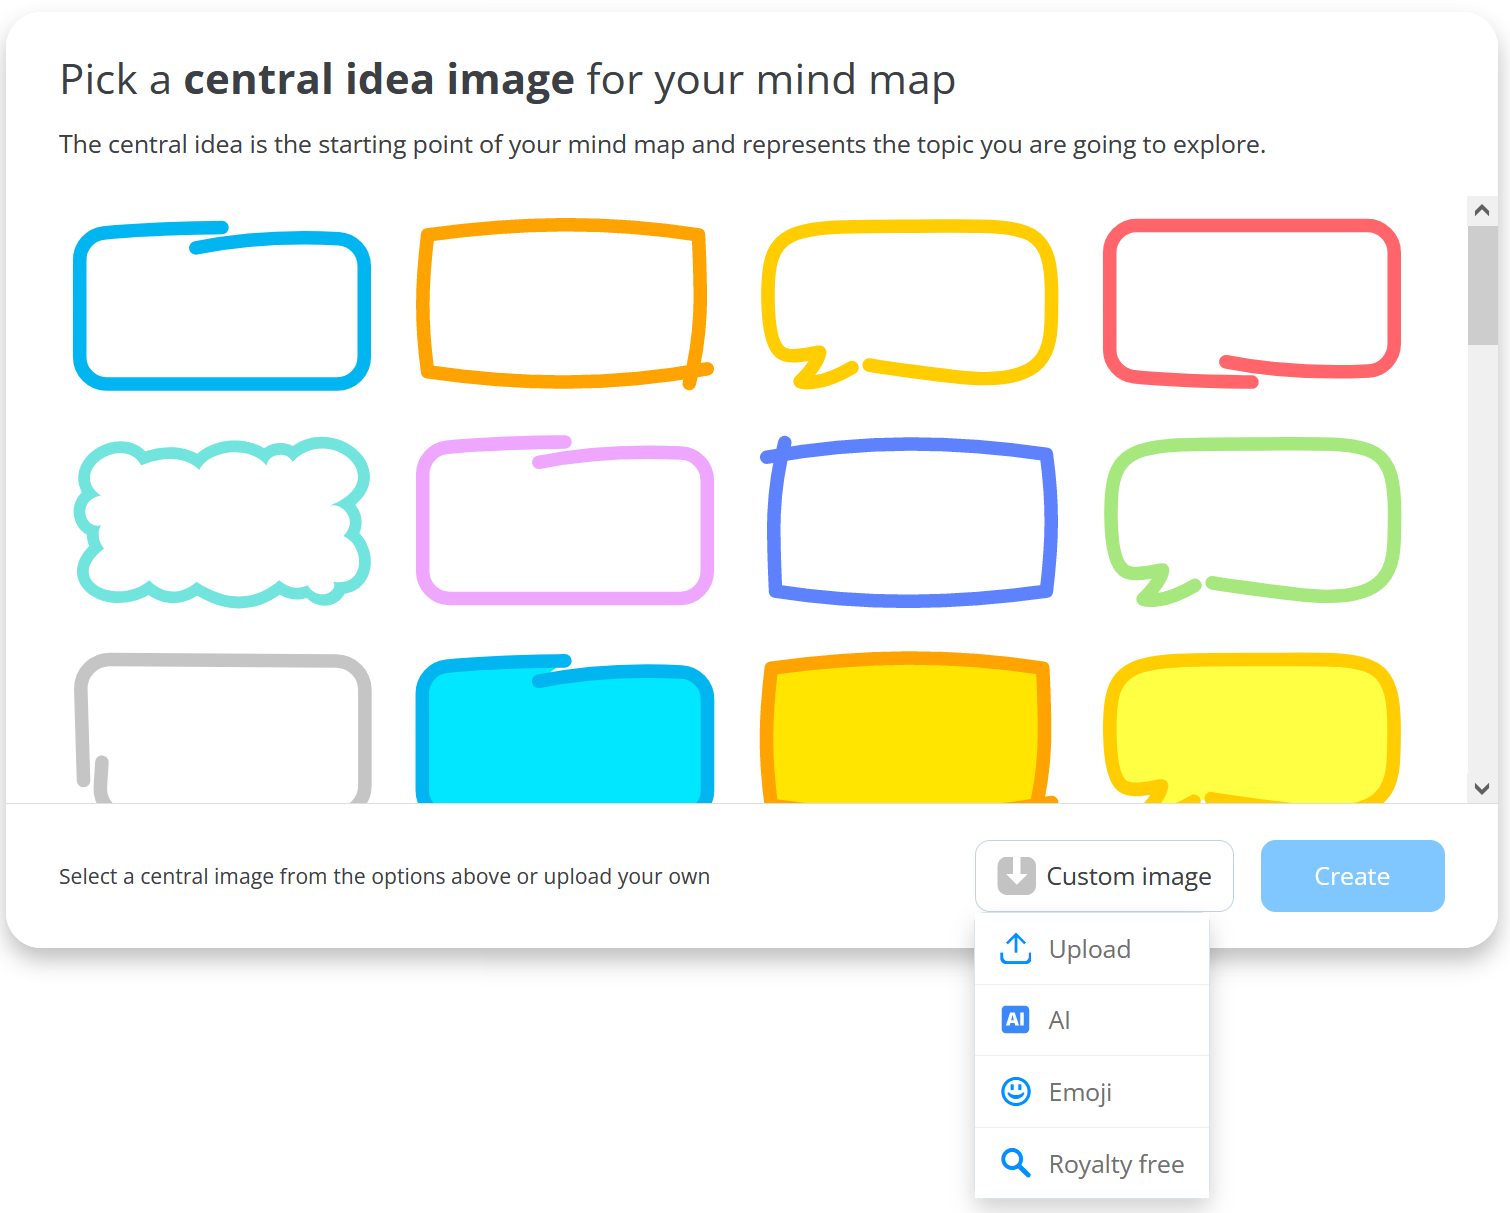 Picking the central idea image.